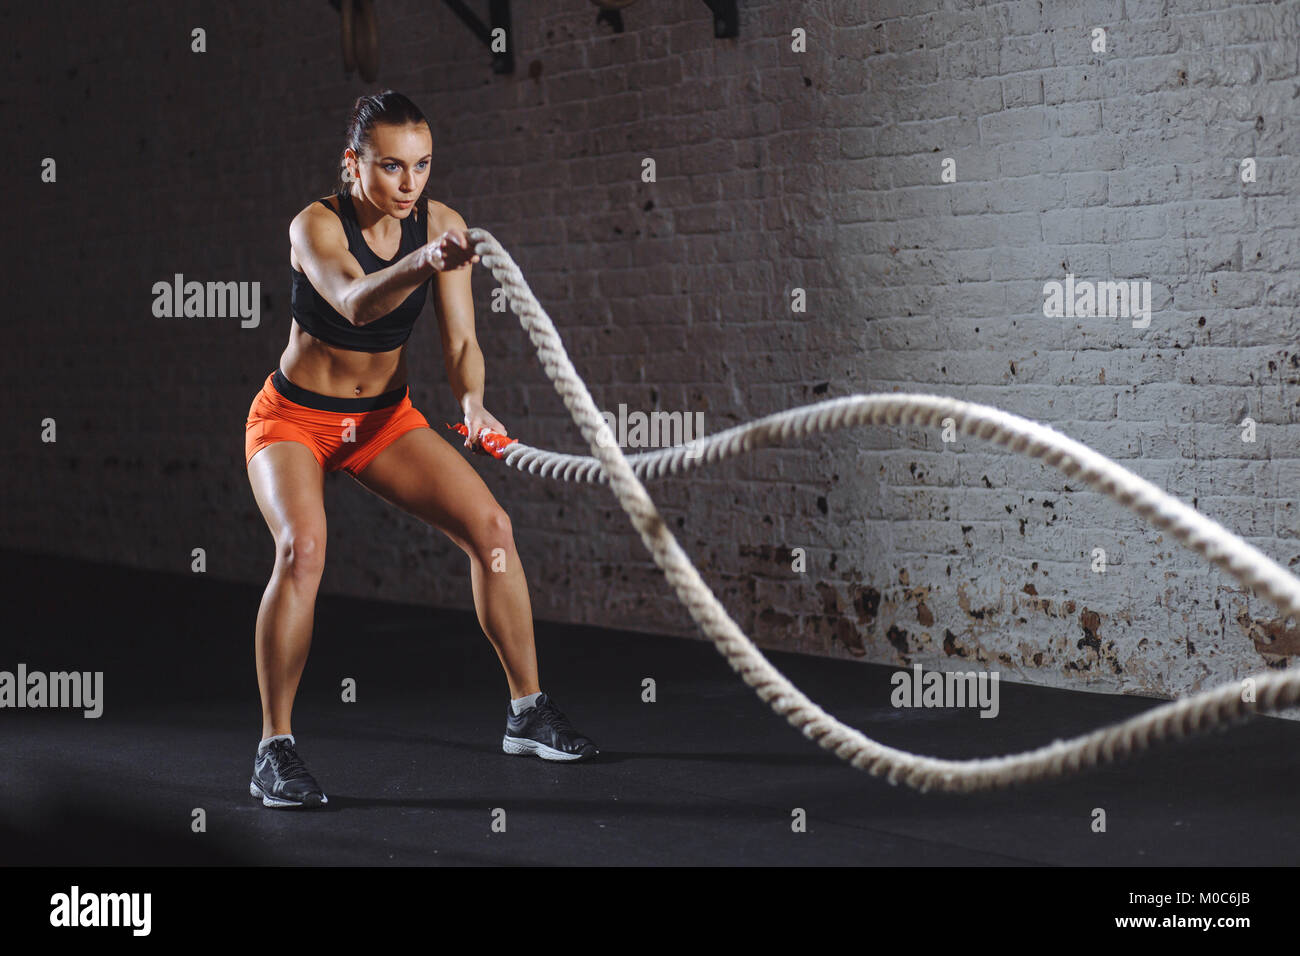 Athletic woman doing battle rope exercices au gymnase Banque D'Images